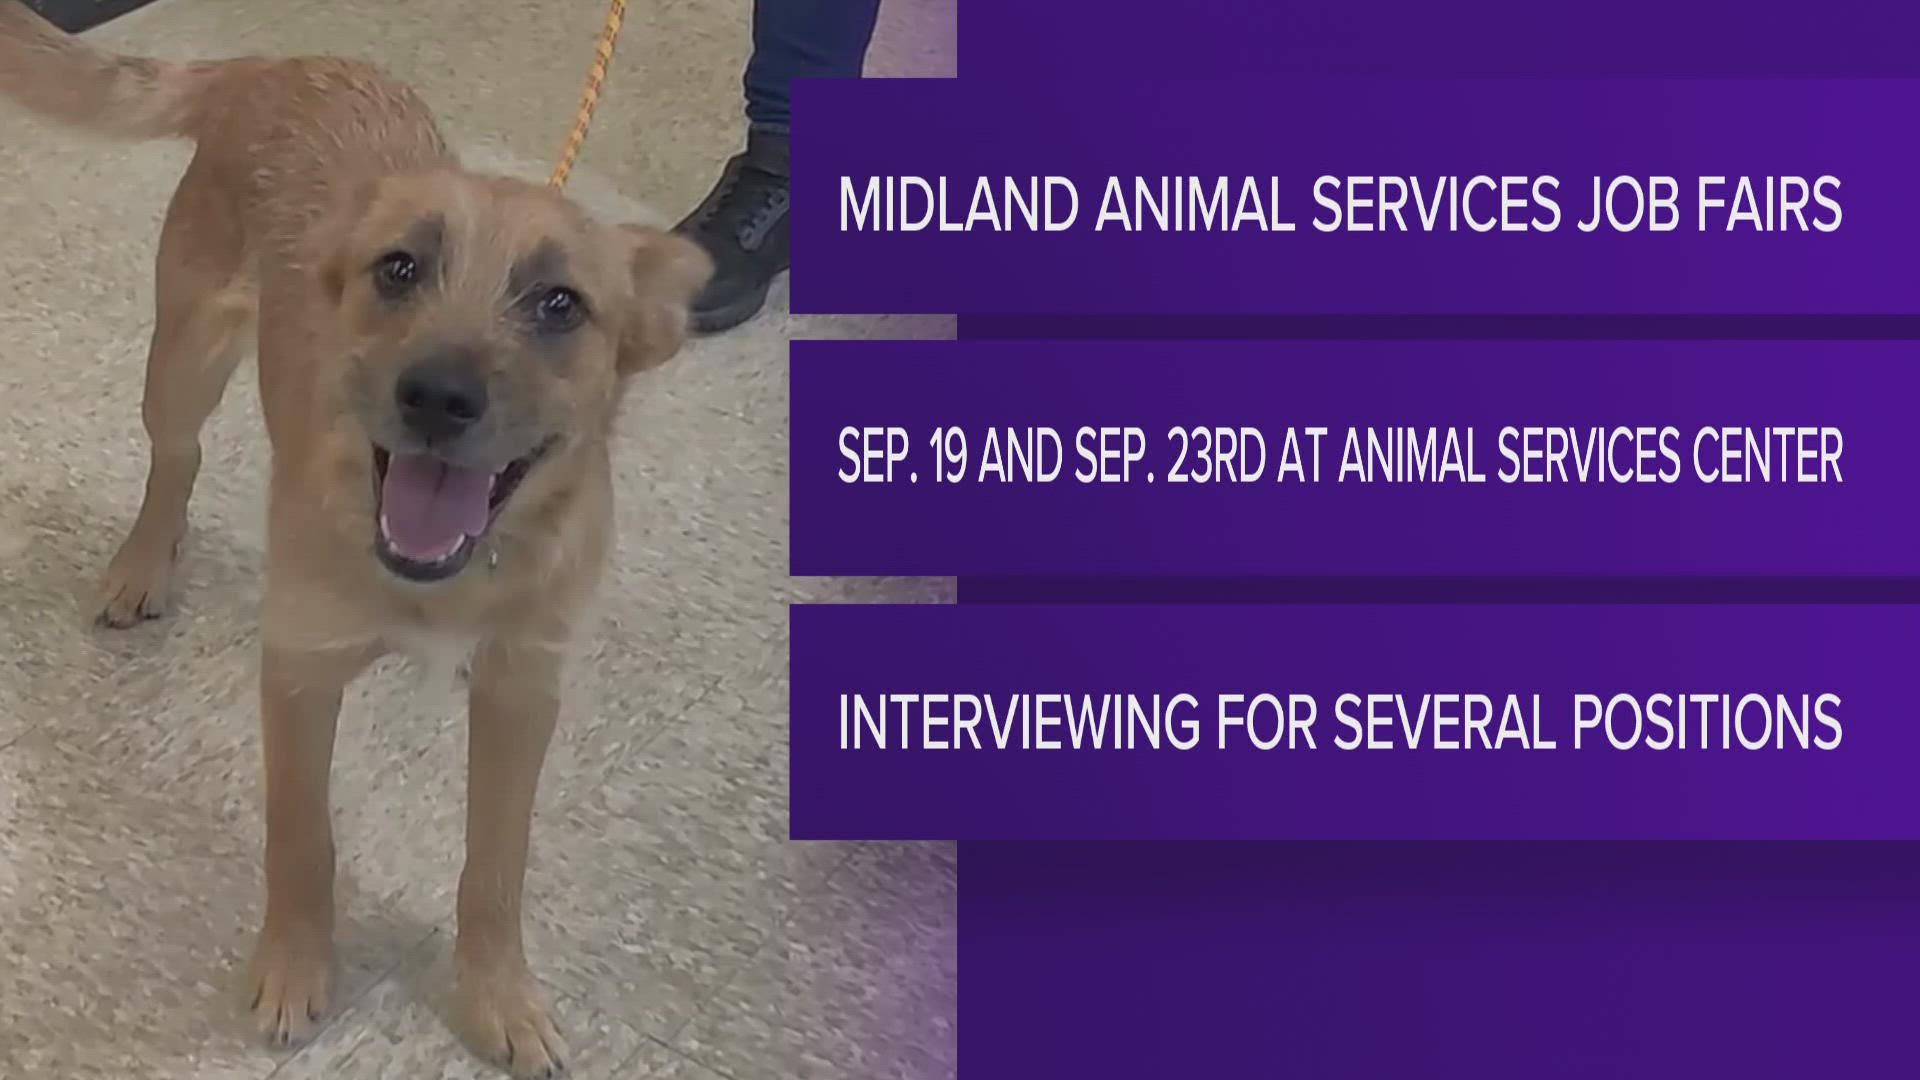 City of Midland Animal Services to host two job fairs in September |  